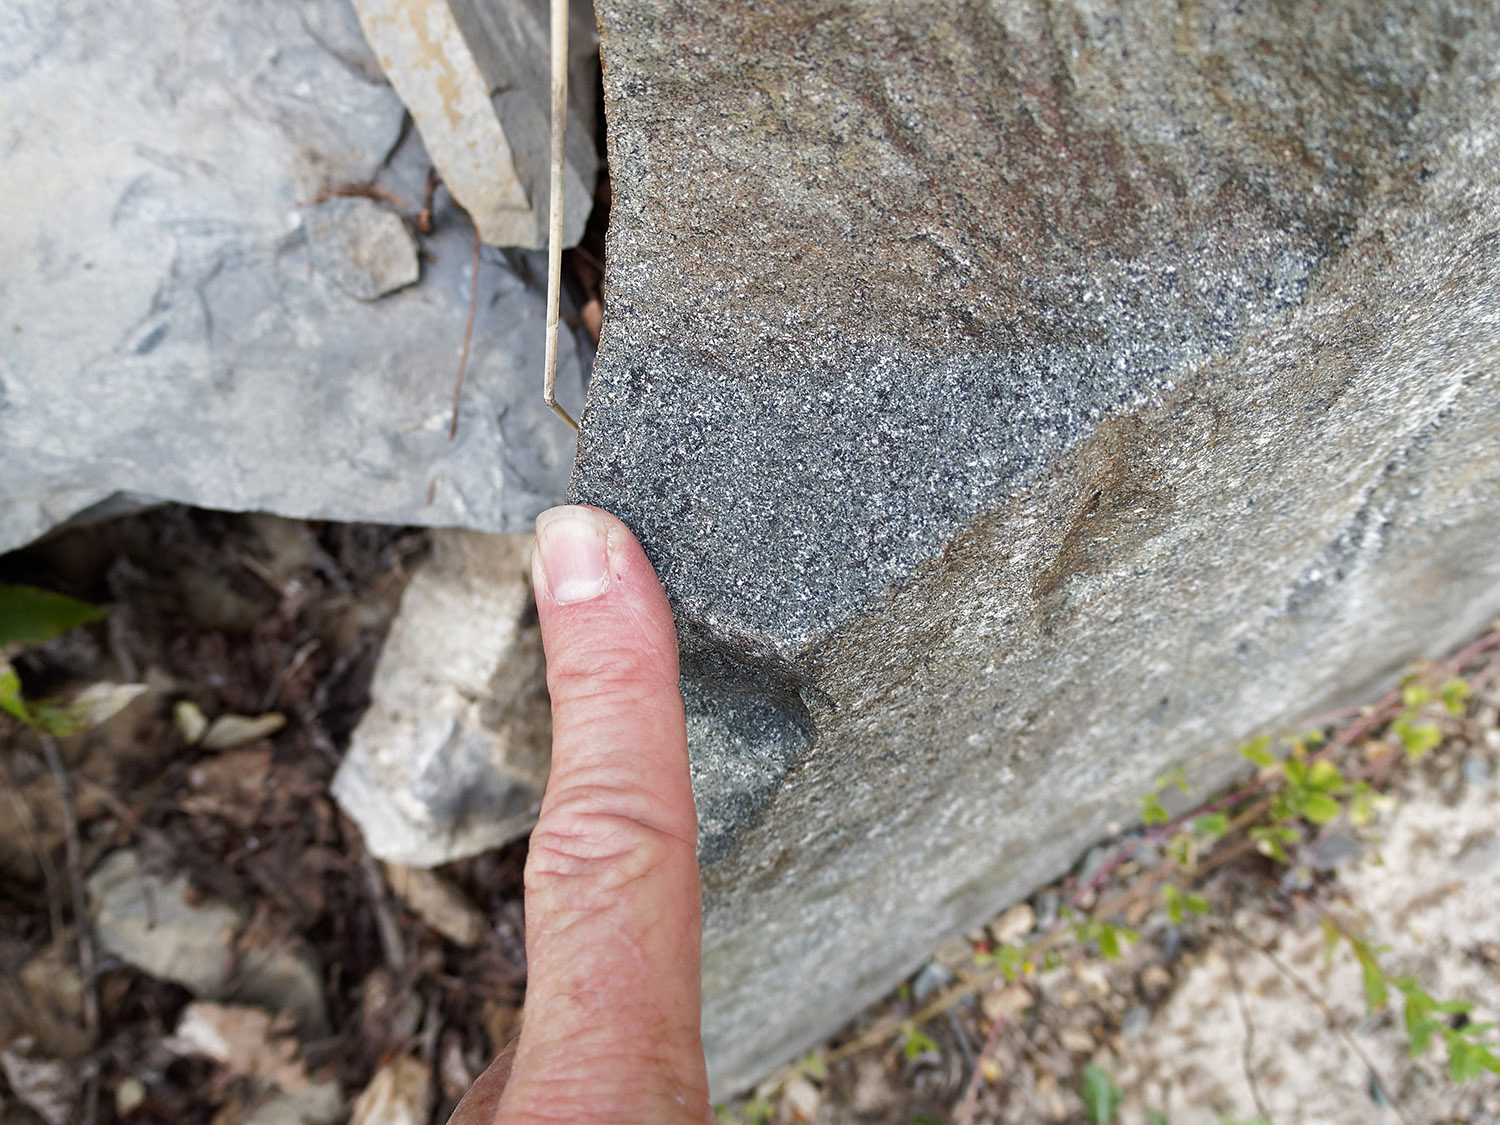 Detail of diorite in the sill.